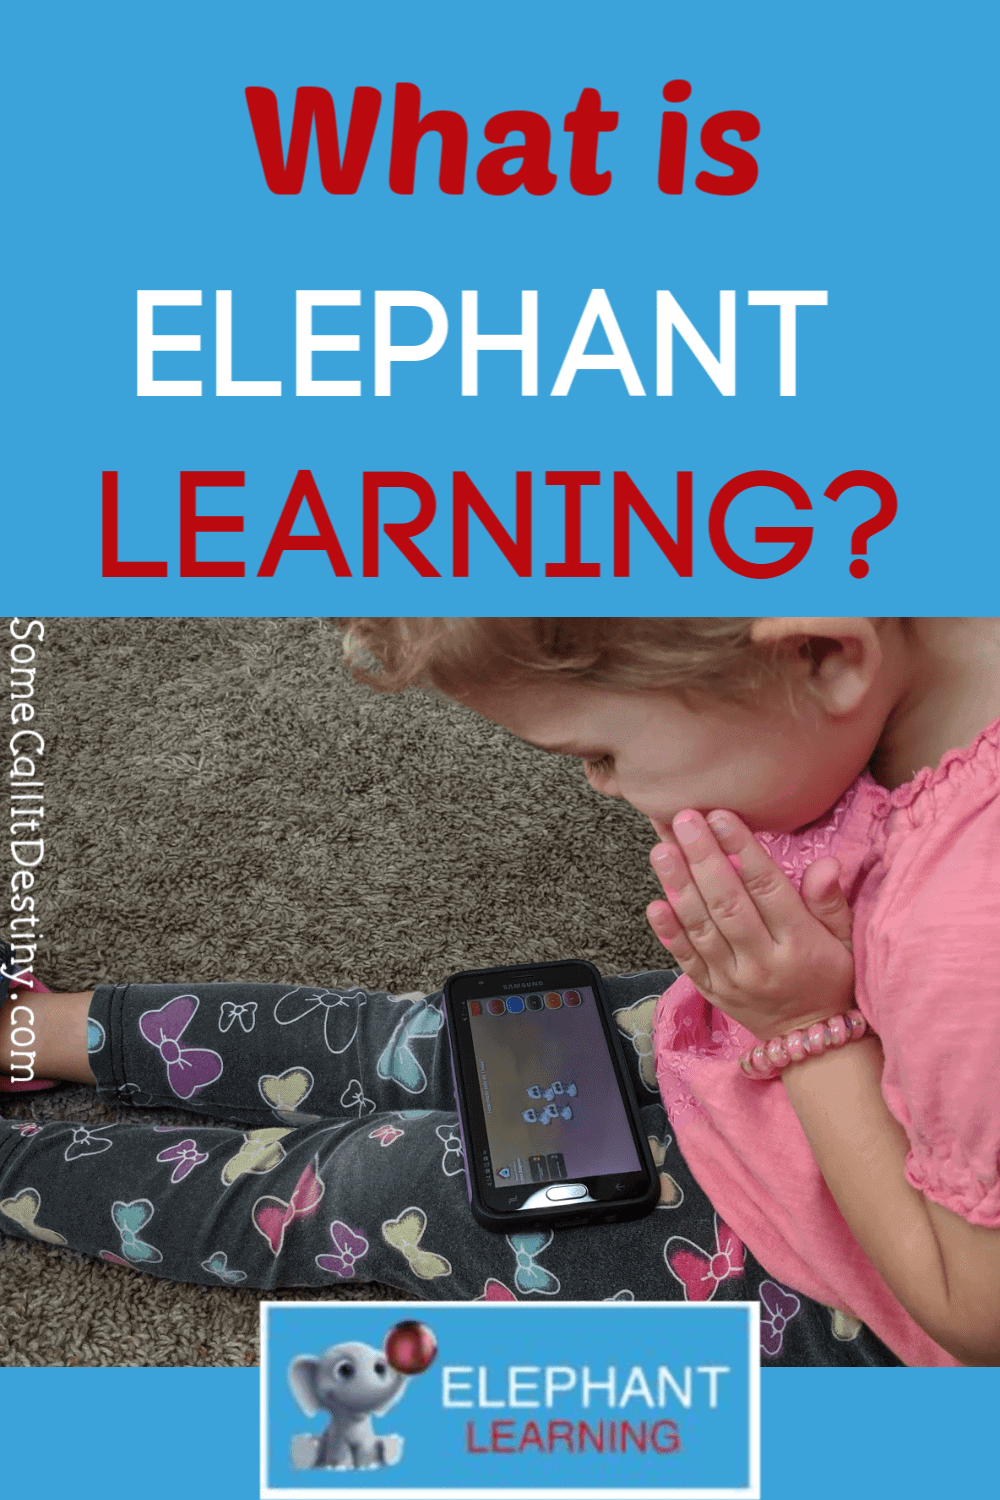 Elephant Learning app review